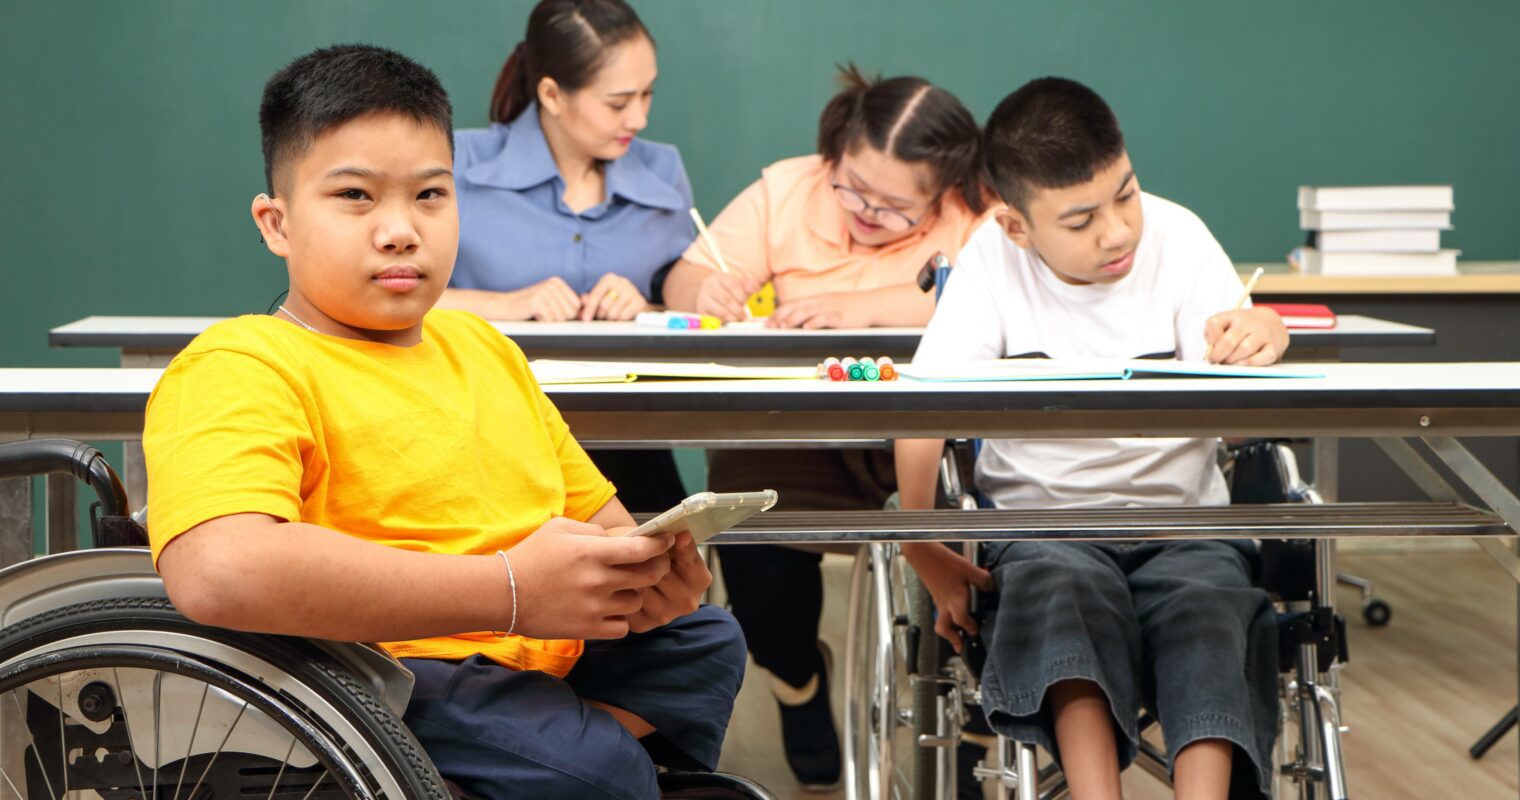 A student wearing an orange shirt, sitting in a wheelchair, looking at the camera, while other students work at desks in the background.